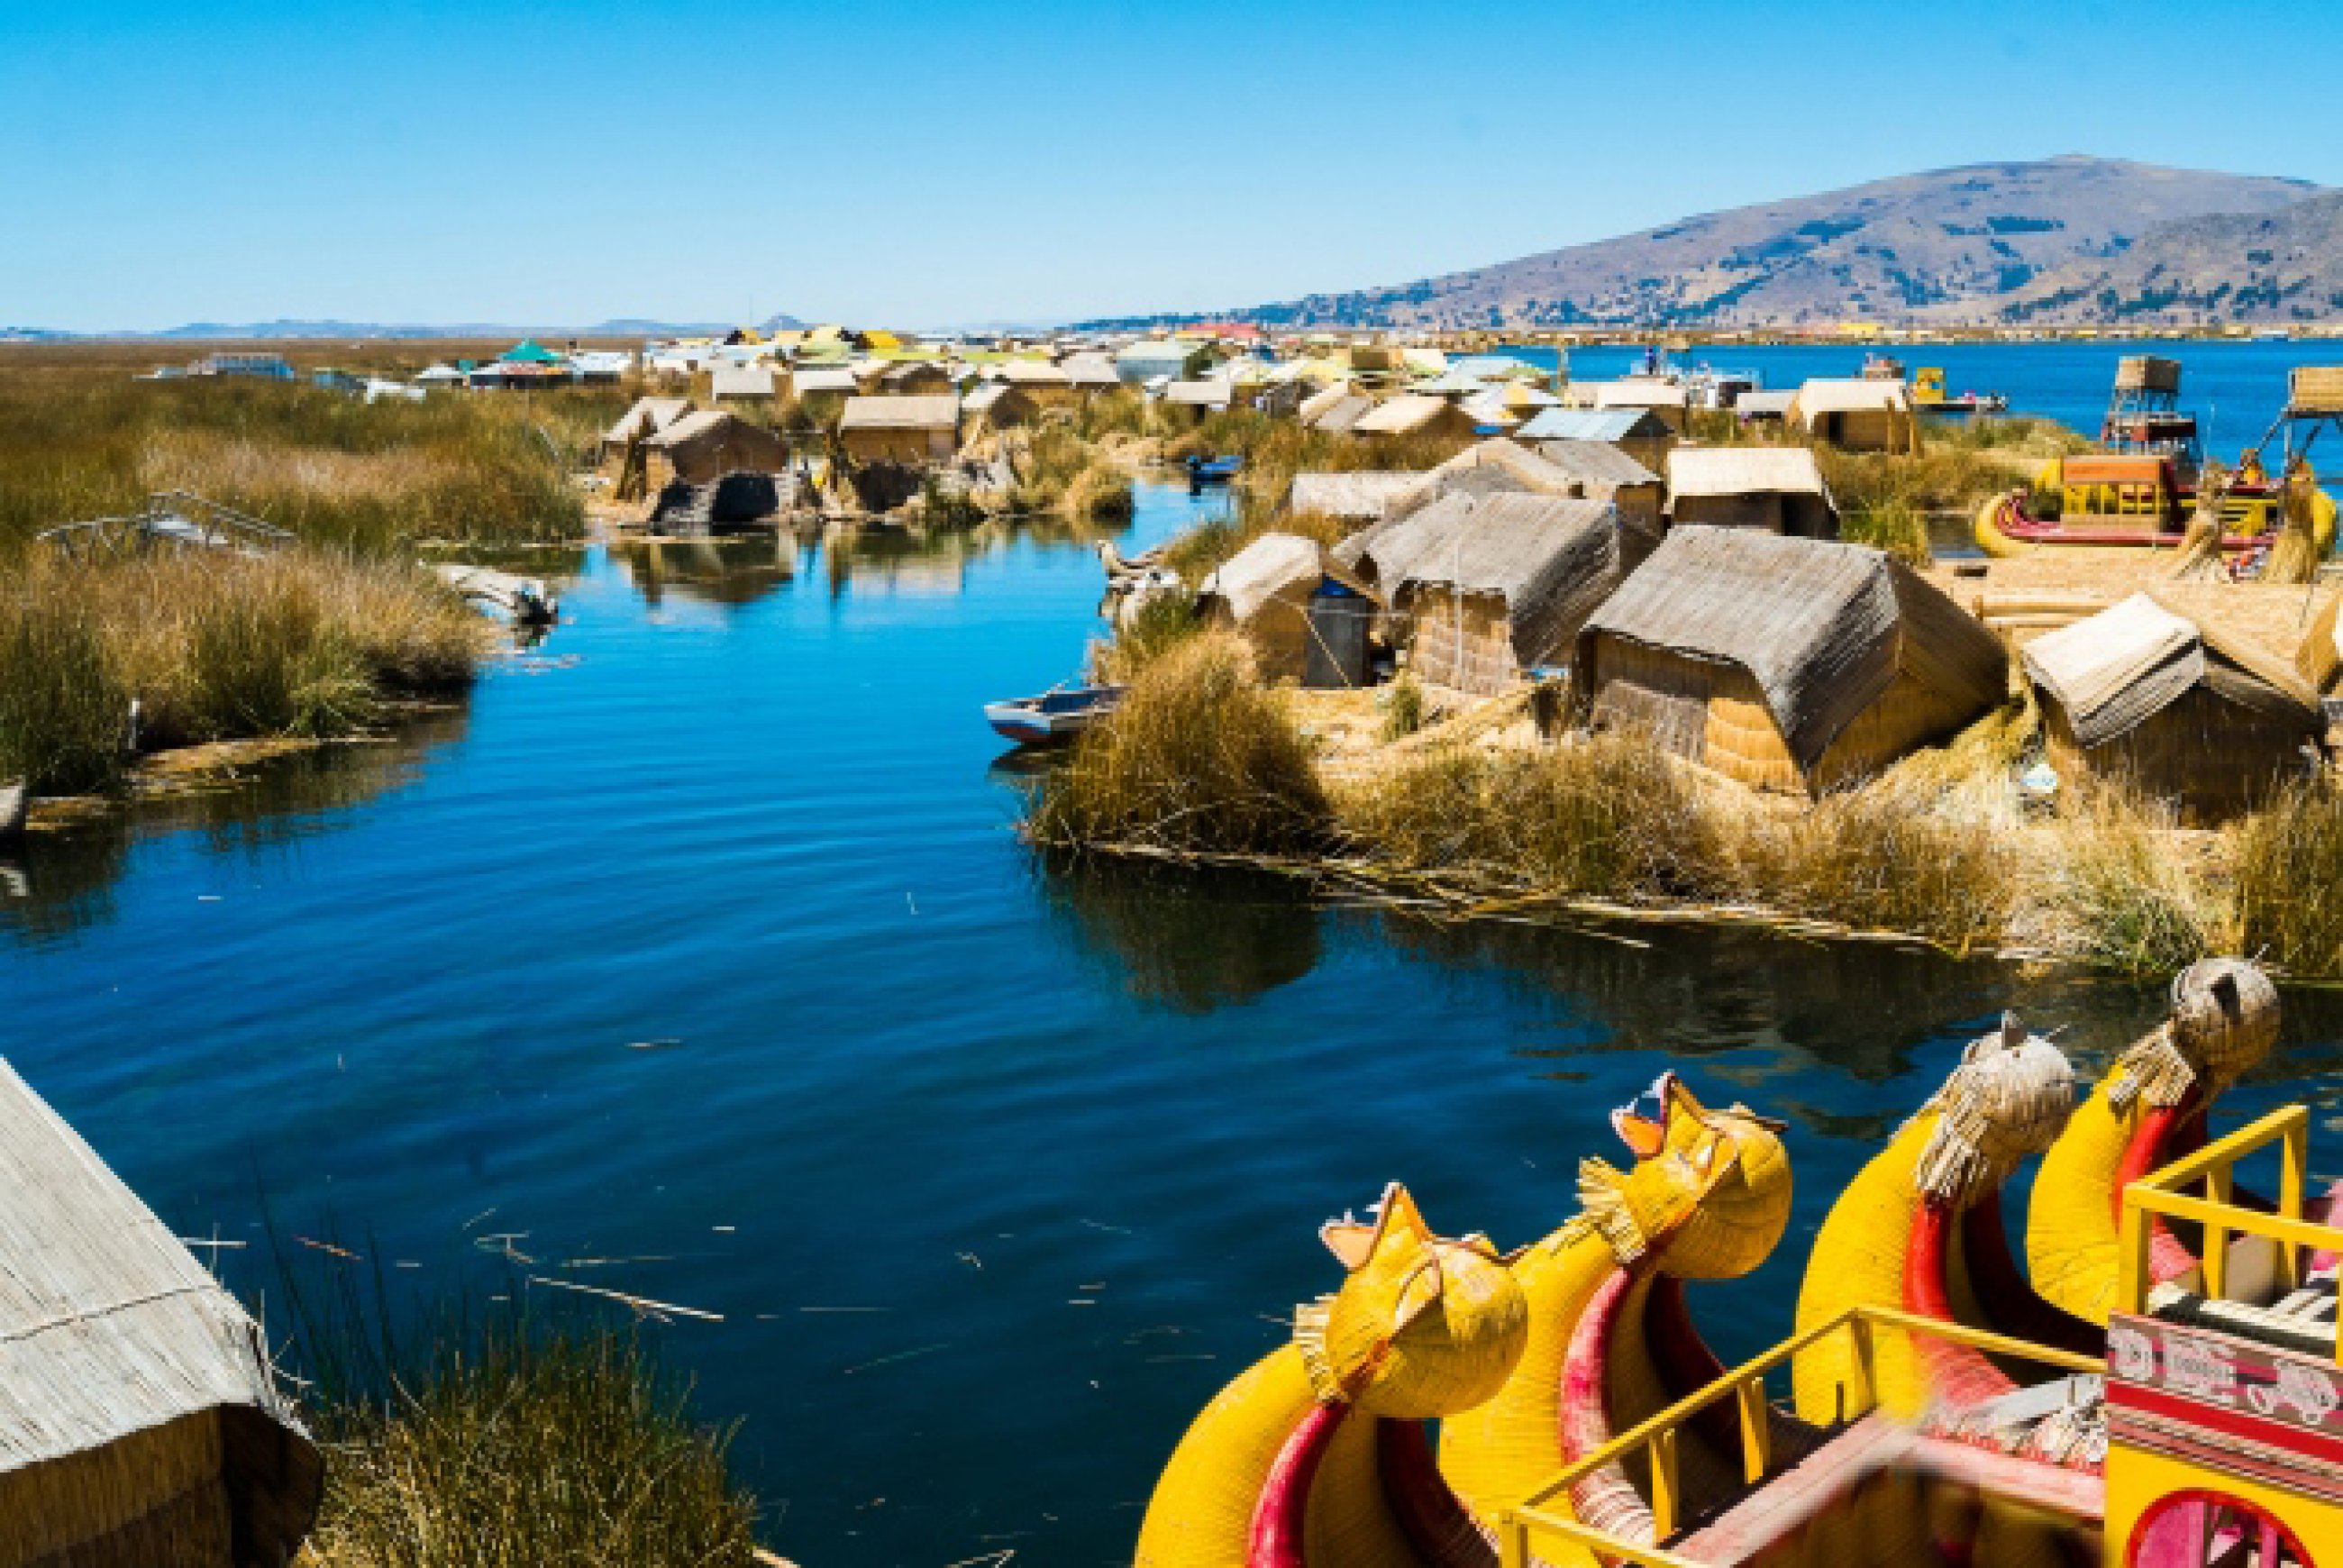 https://bubo.sk/uploads/galleries/7430/view-of-uros-floating-islands-with-typical-boats-puno-peru.jpg